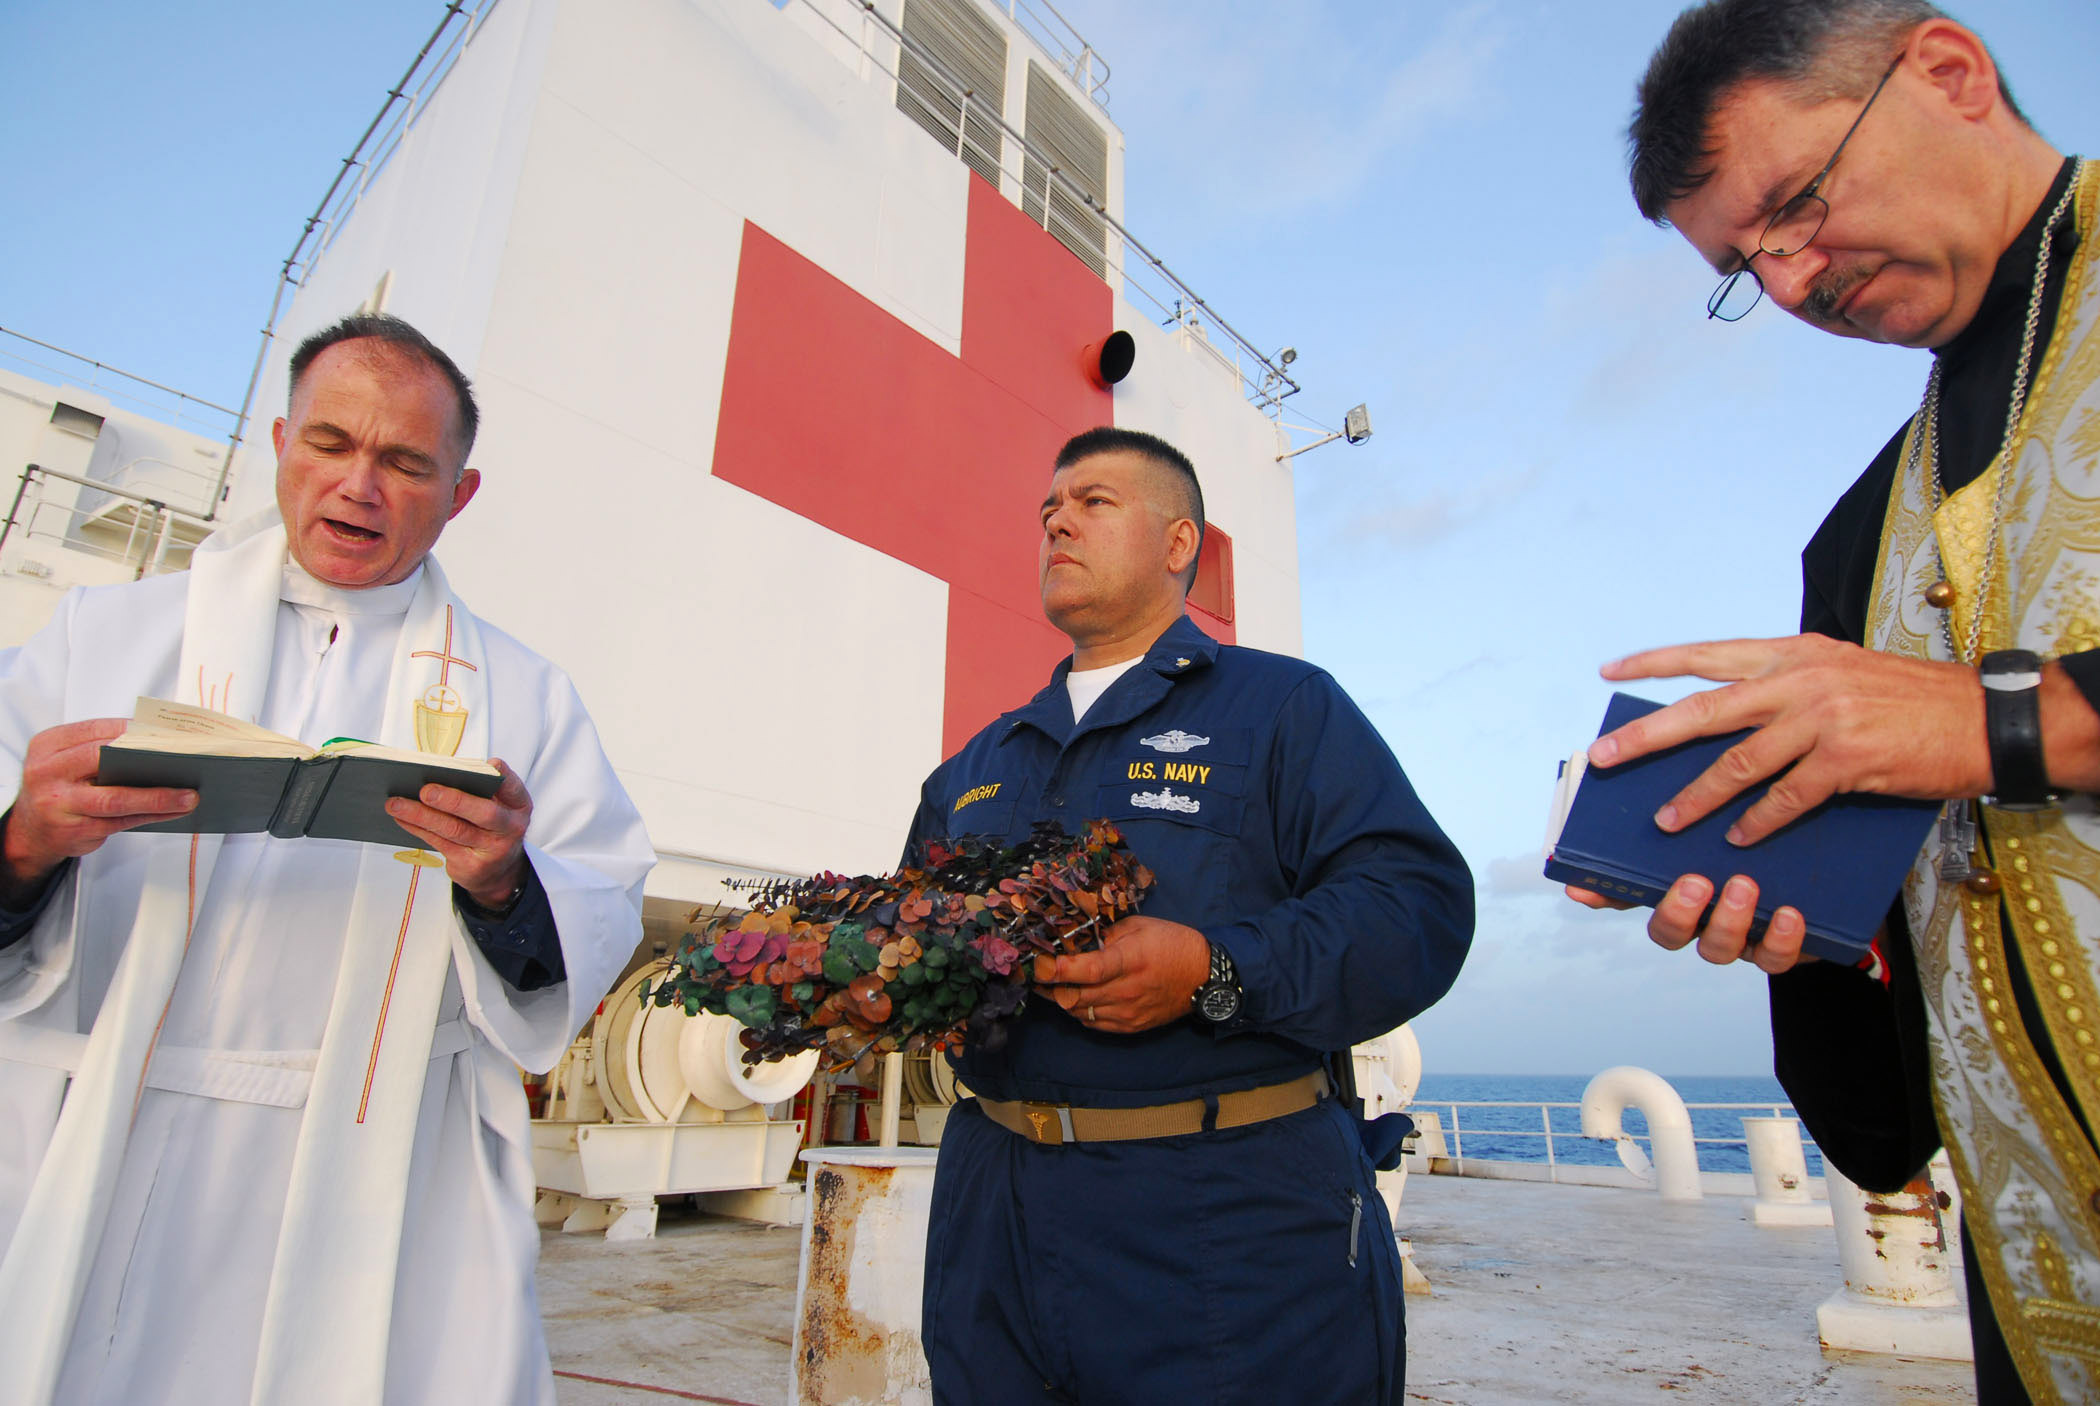 US Navy 070619-N-6081J-014 Lt. Cmdr. Paul Evers, a Navy chaplain aboard the Military Sealift Command hospital ship USNS Comfort (T-AH 20), recites memorial rites for Robert Lee Royer